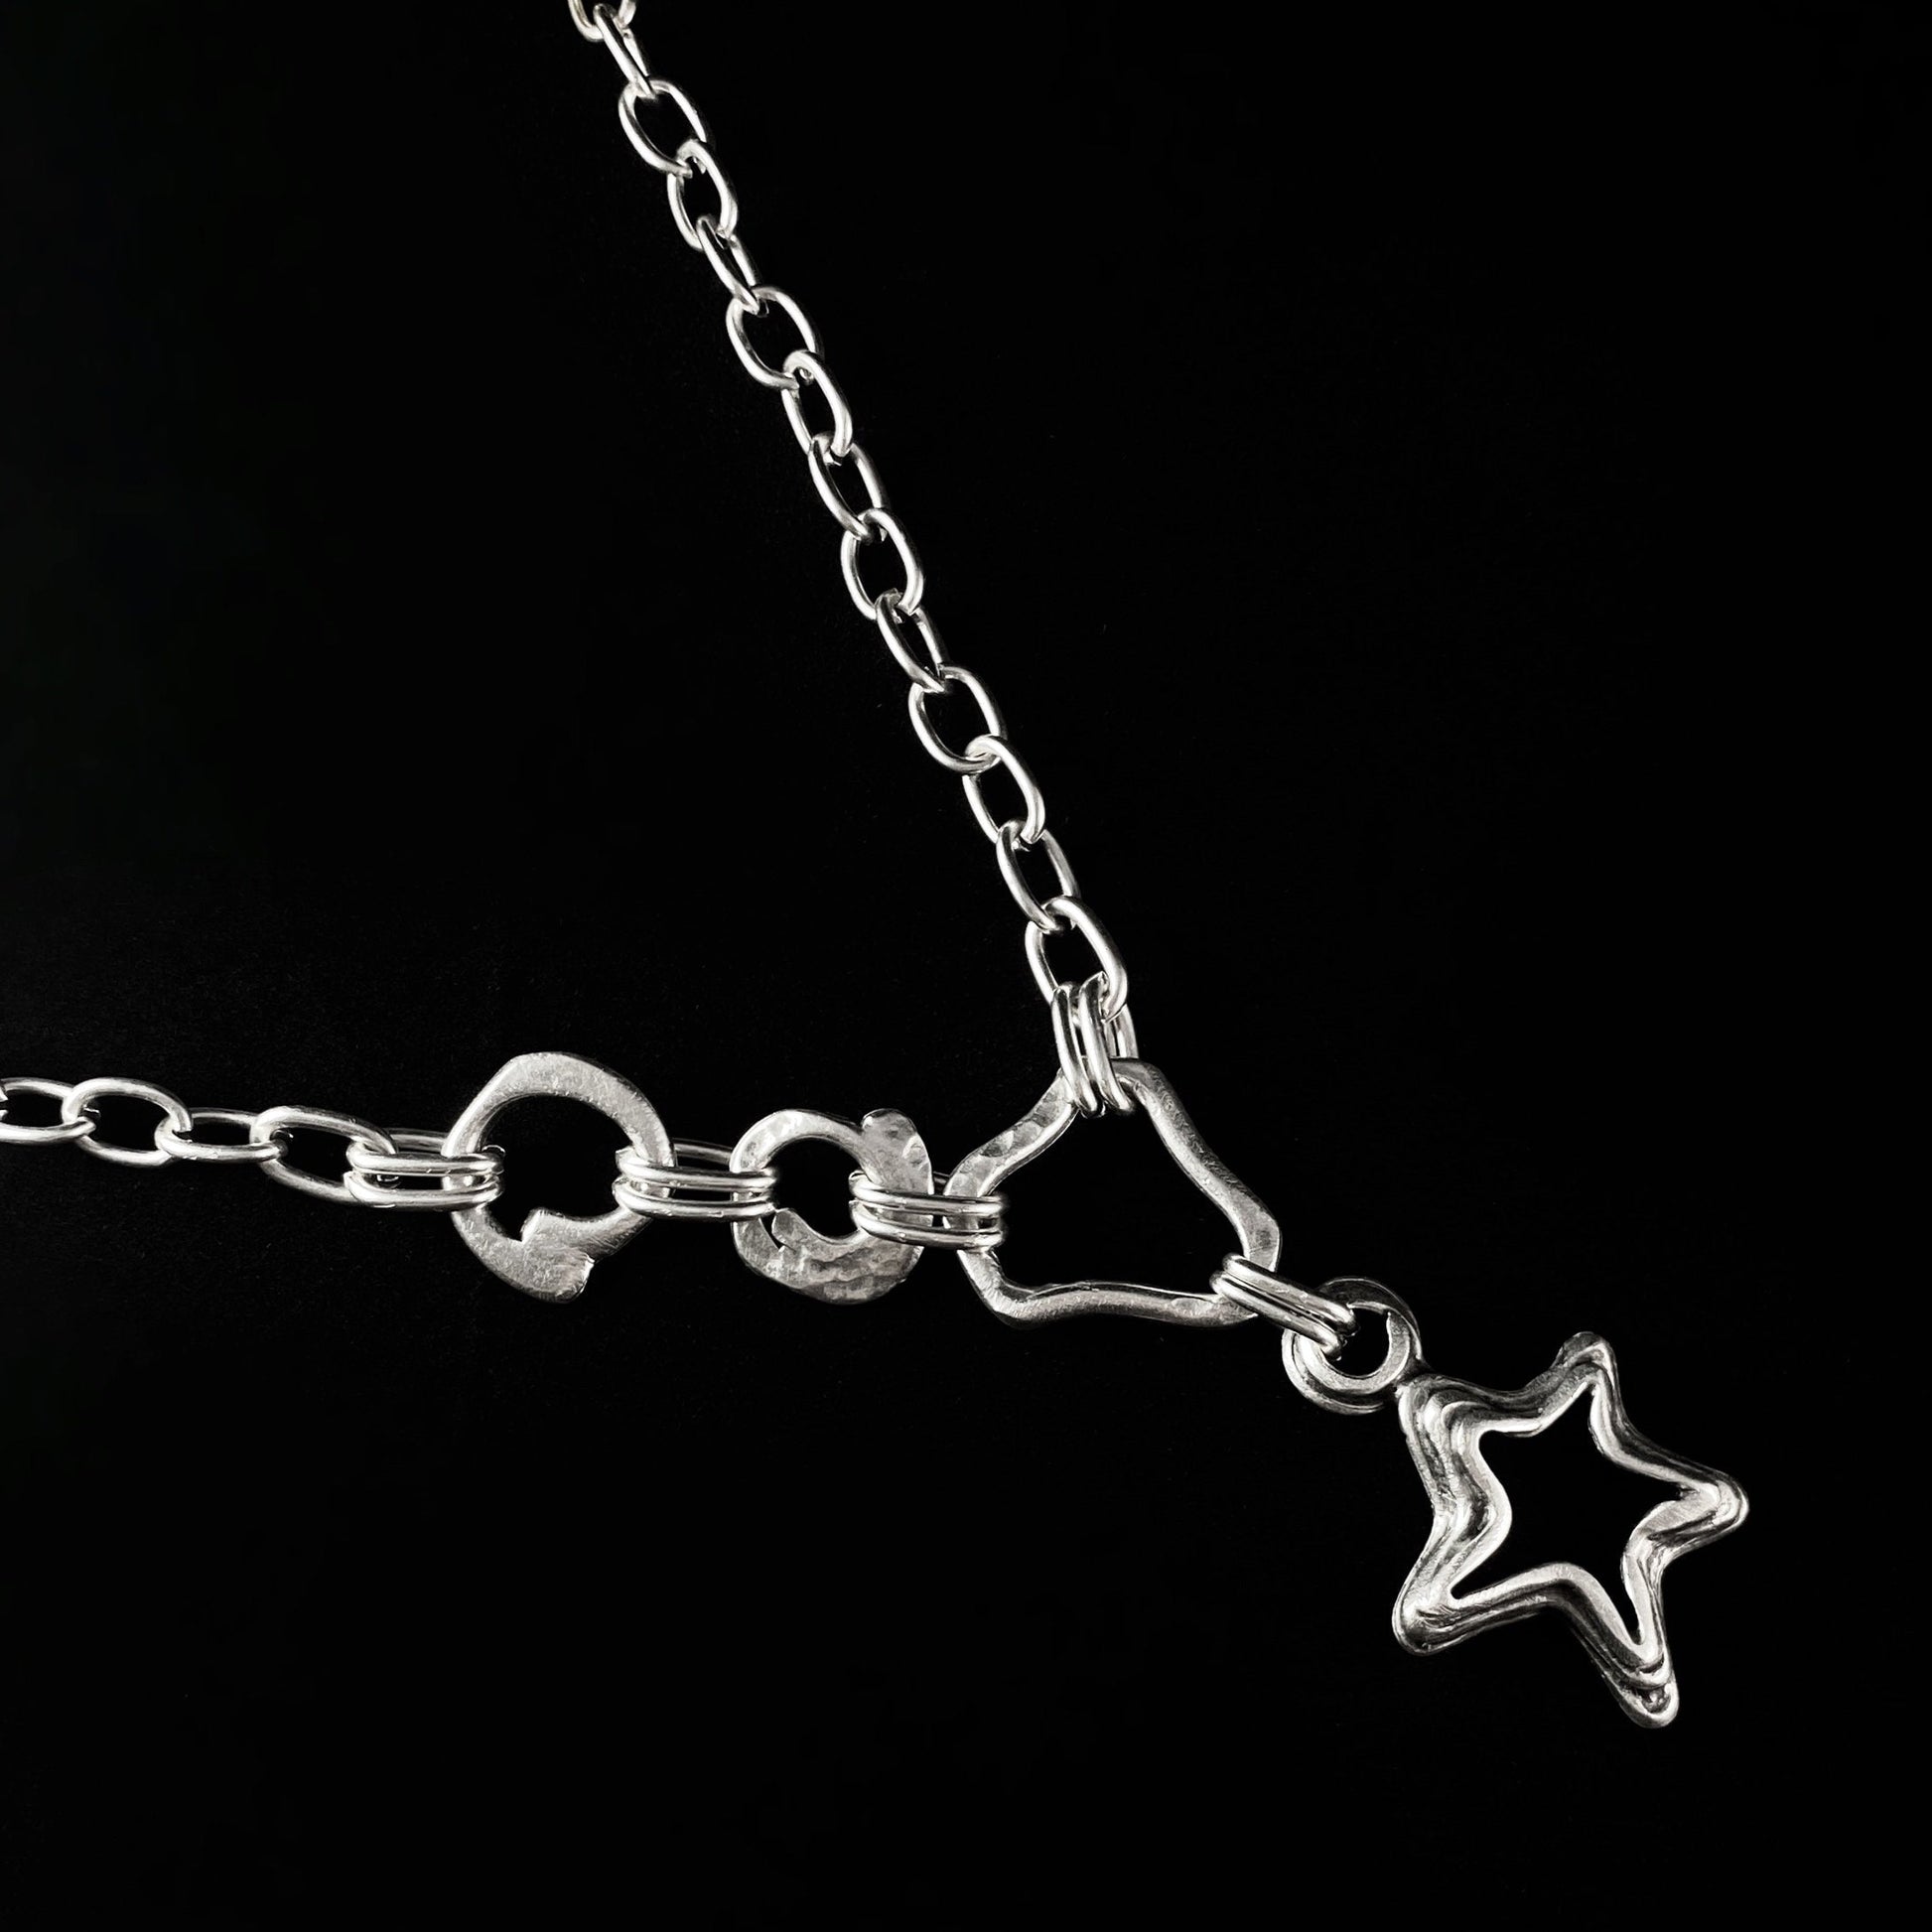 Silver Chain Link AbstractNecklace With Star Pendant, Handmade, Nickel Free-Noir